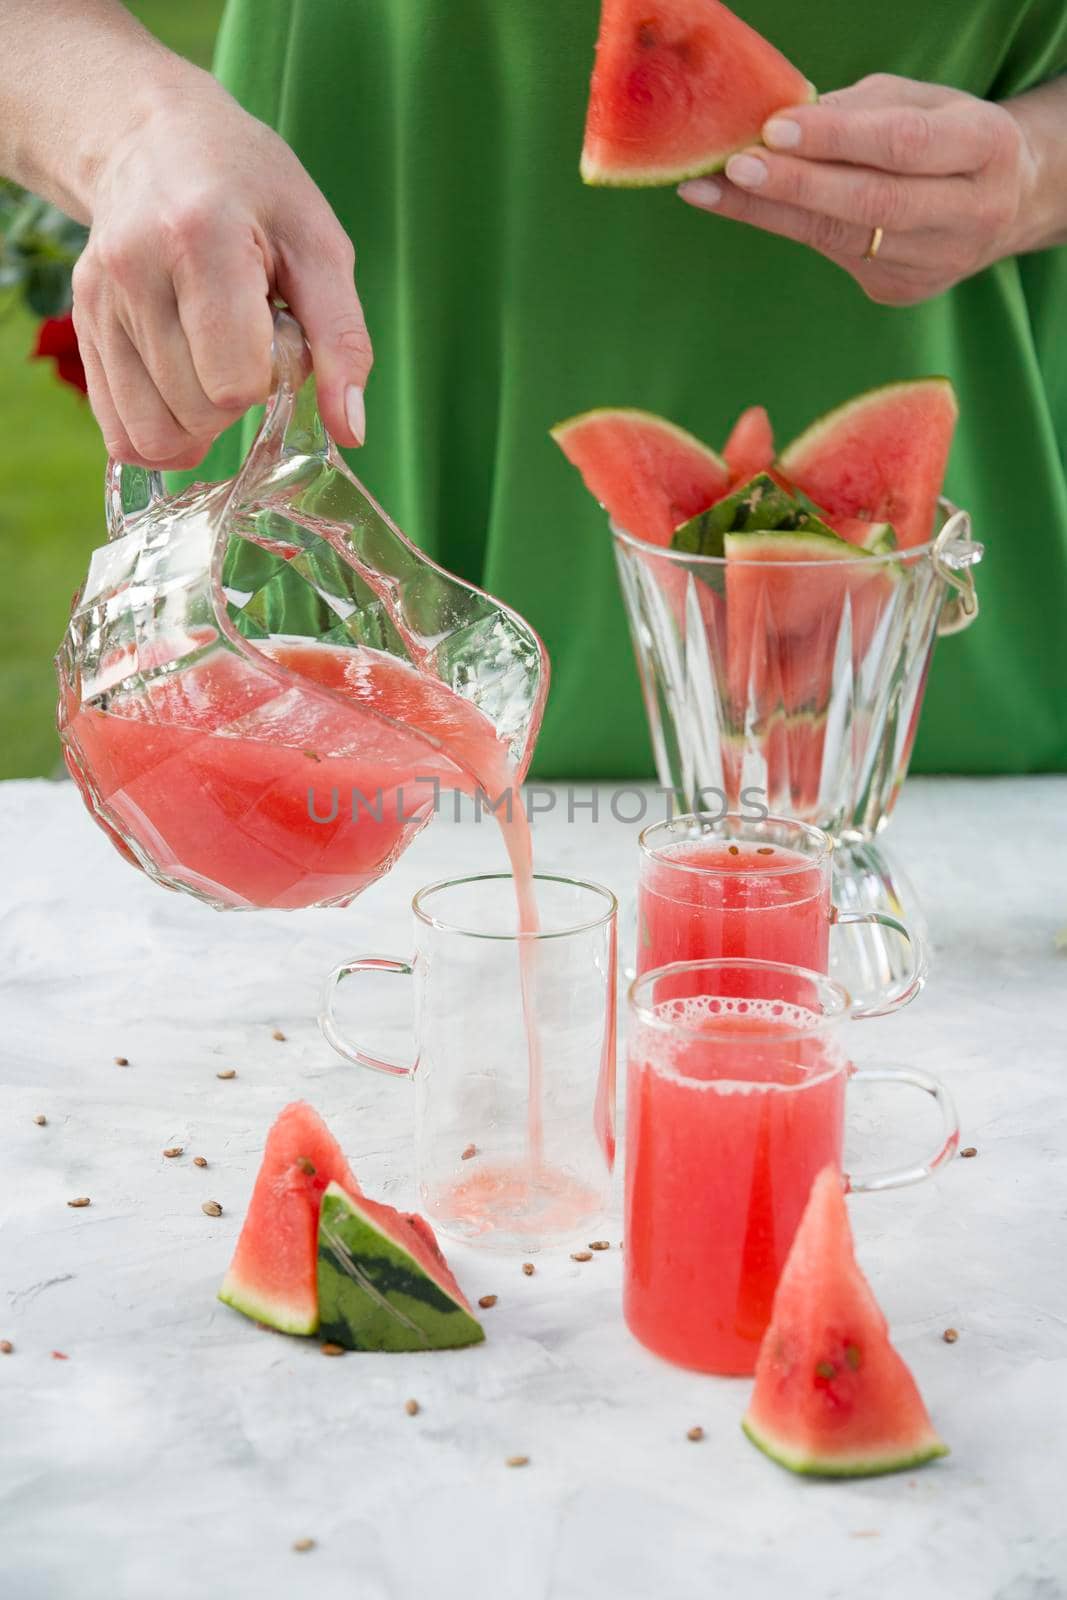 a woman in a green dress pours a red refreshing drink from the pulp of a watermelon into a glass glass, bright natural background